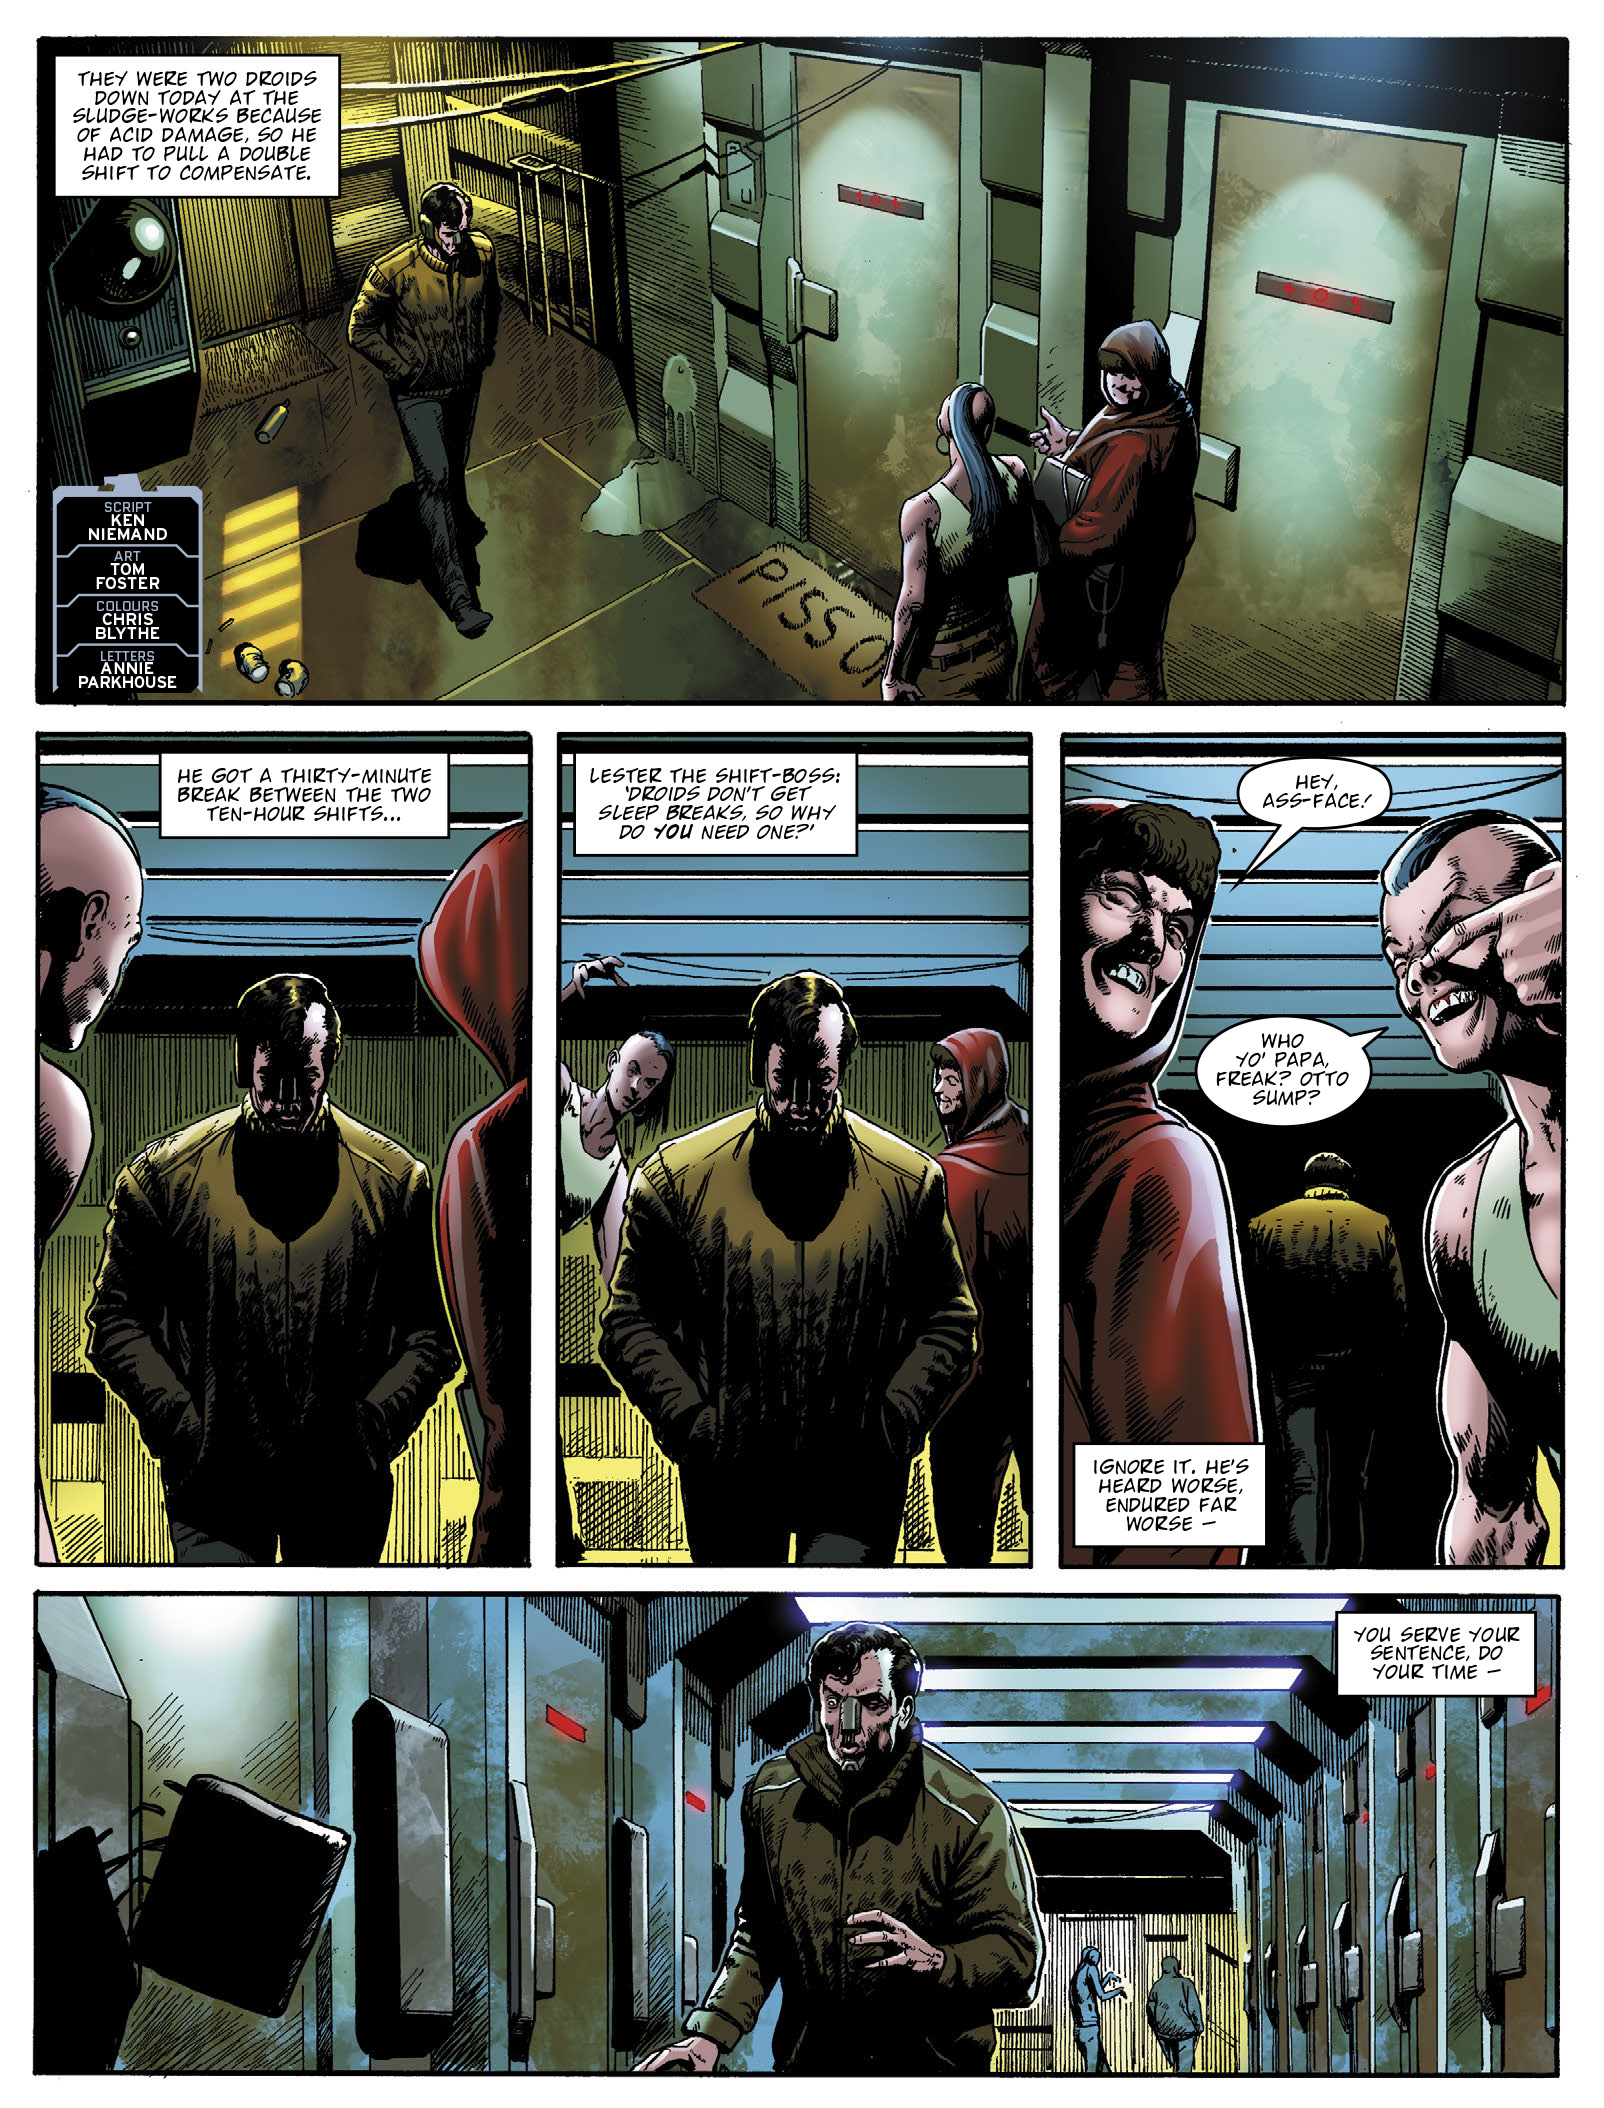 2000 AD: Chapter 2226 - Page 3